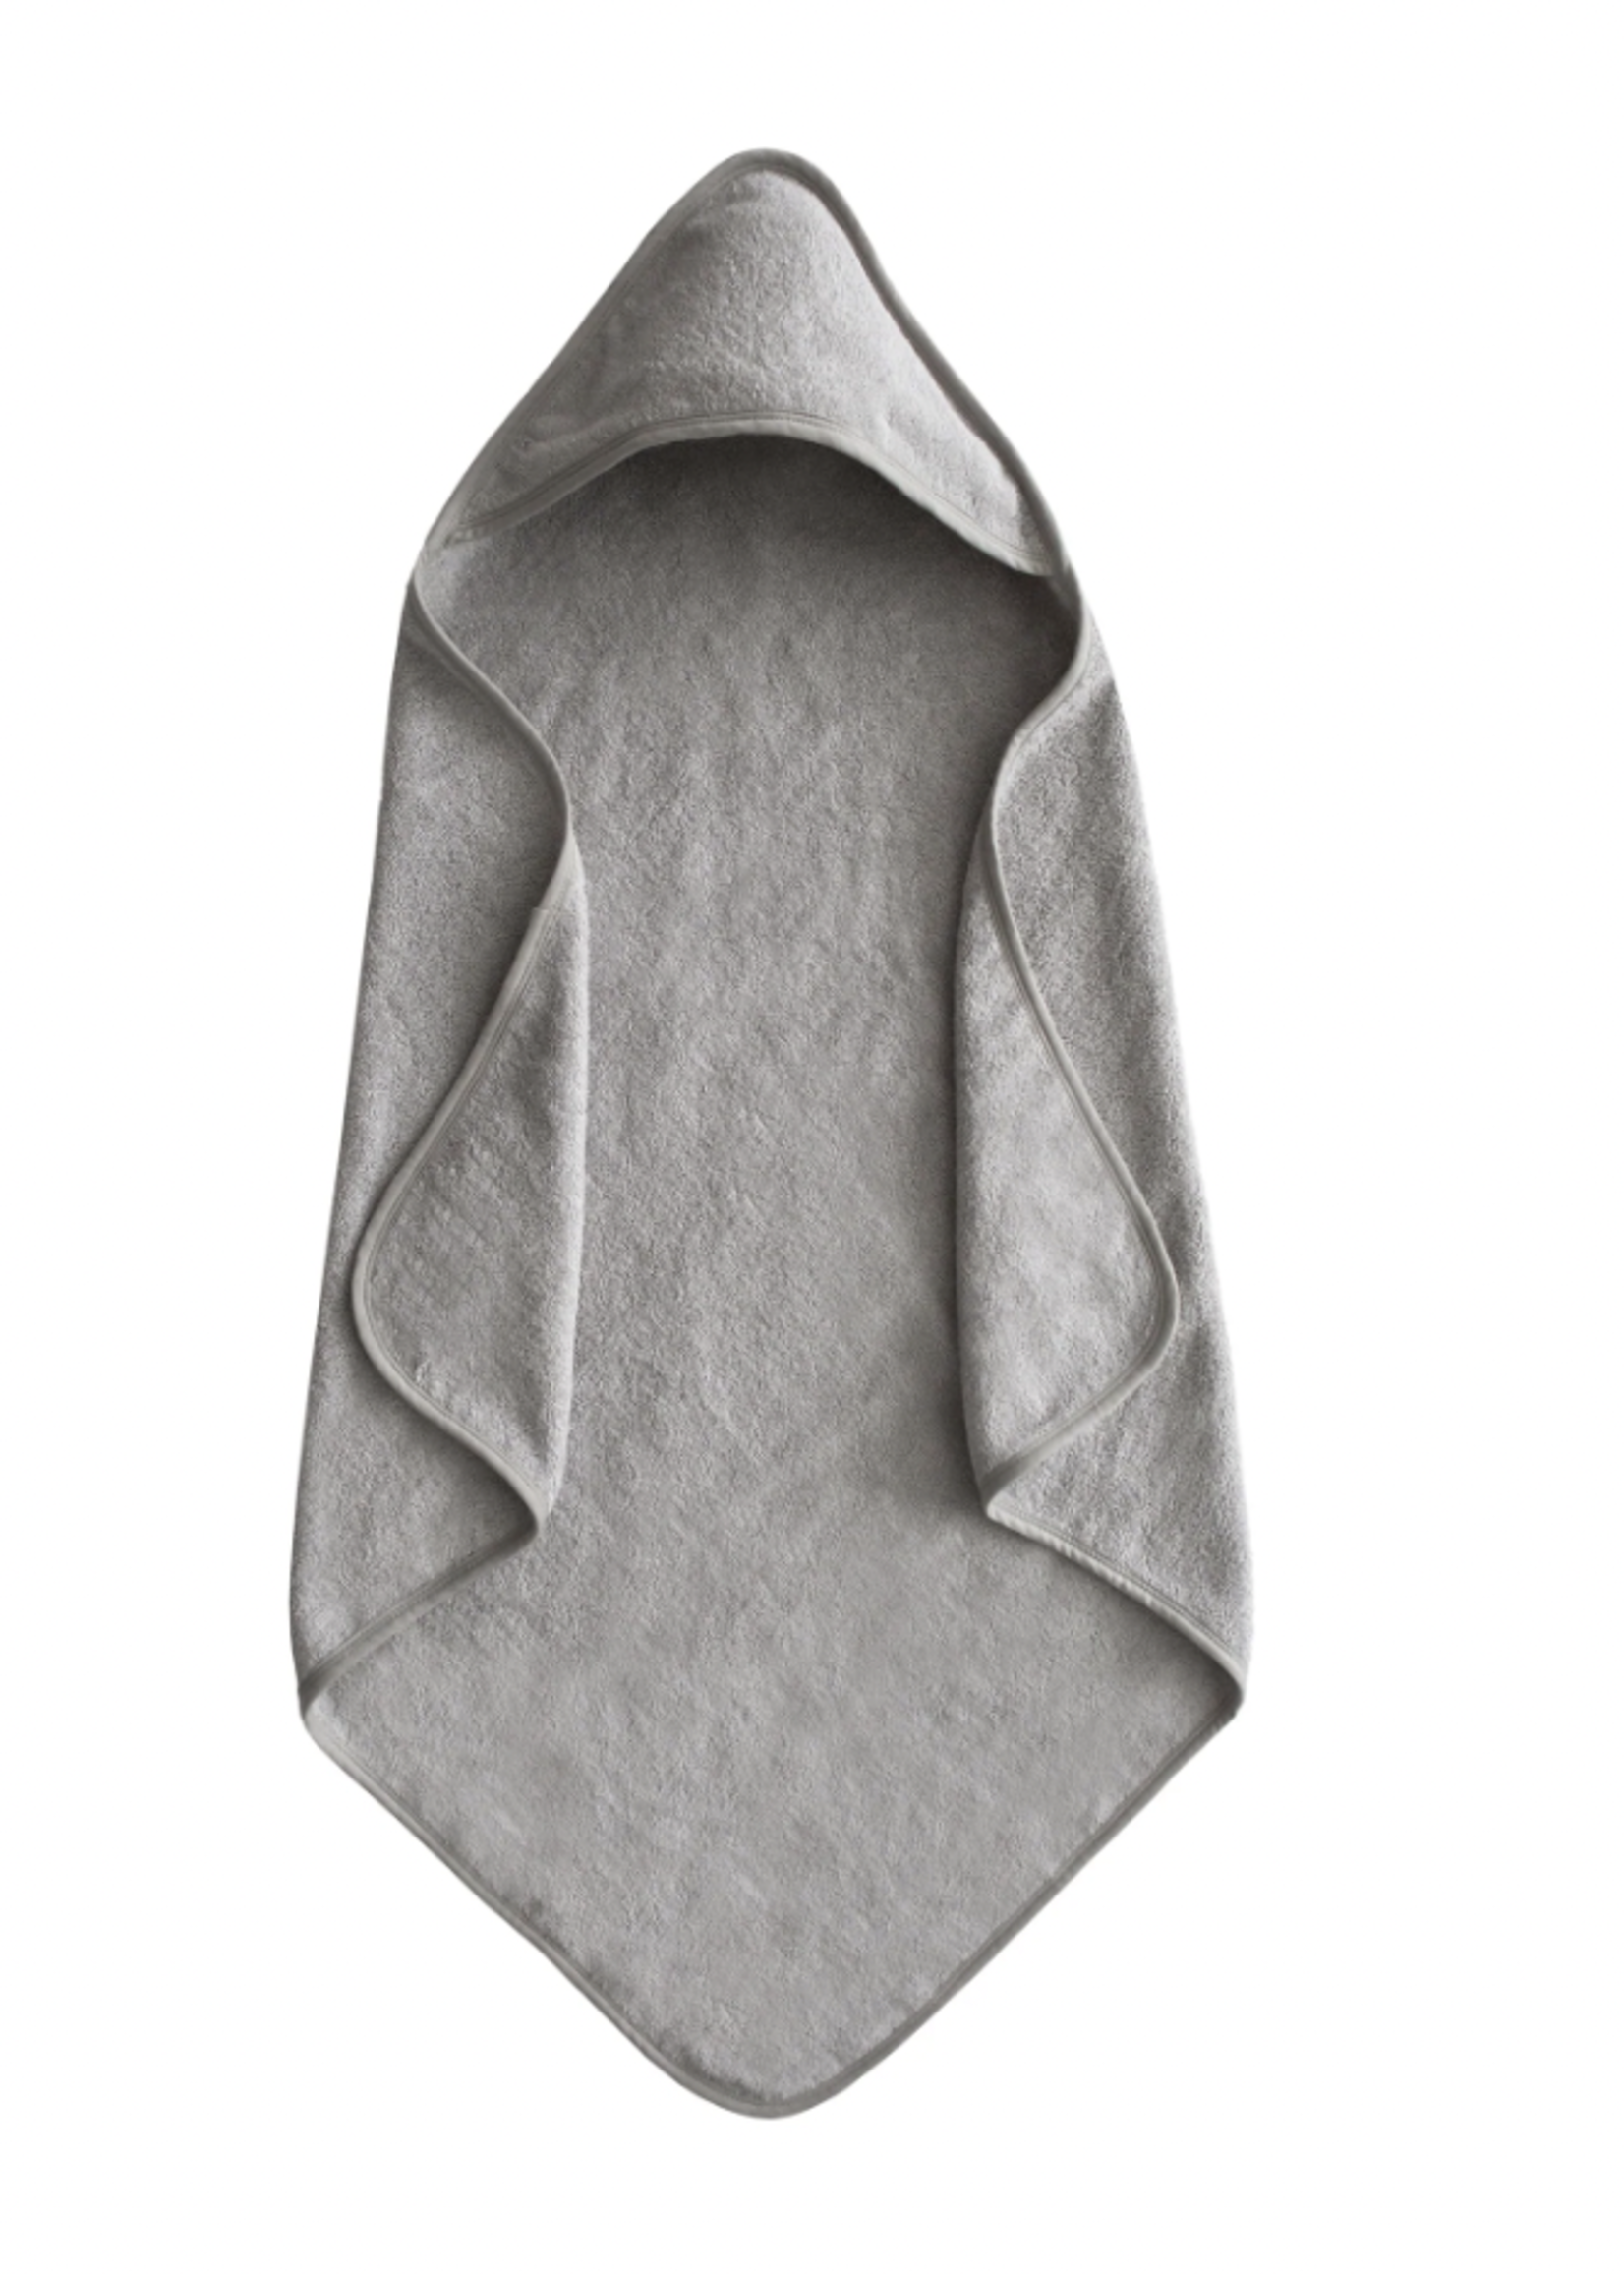 Elitaire Petite Organic Cotton Hooded Towel in Gray